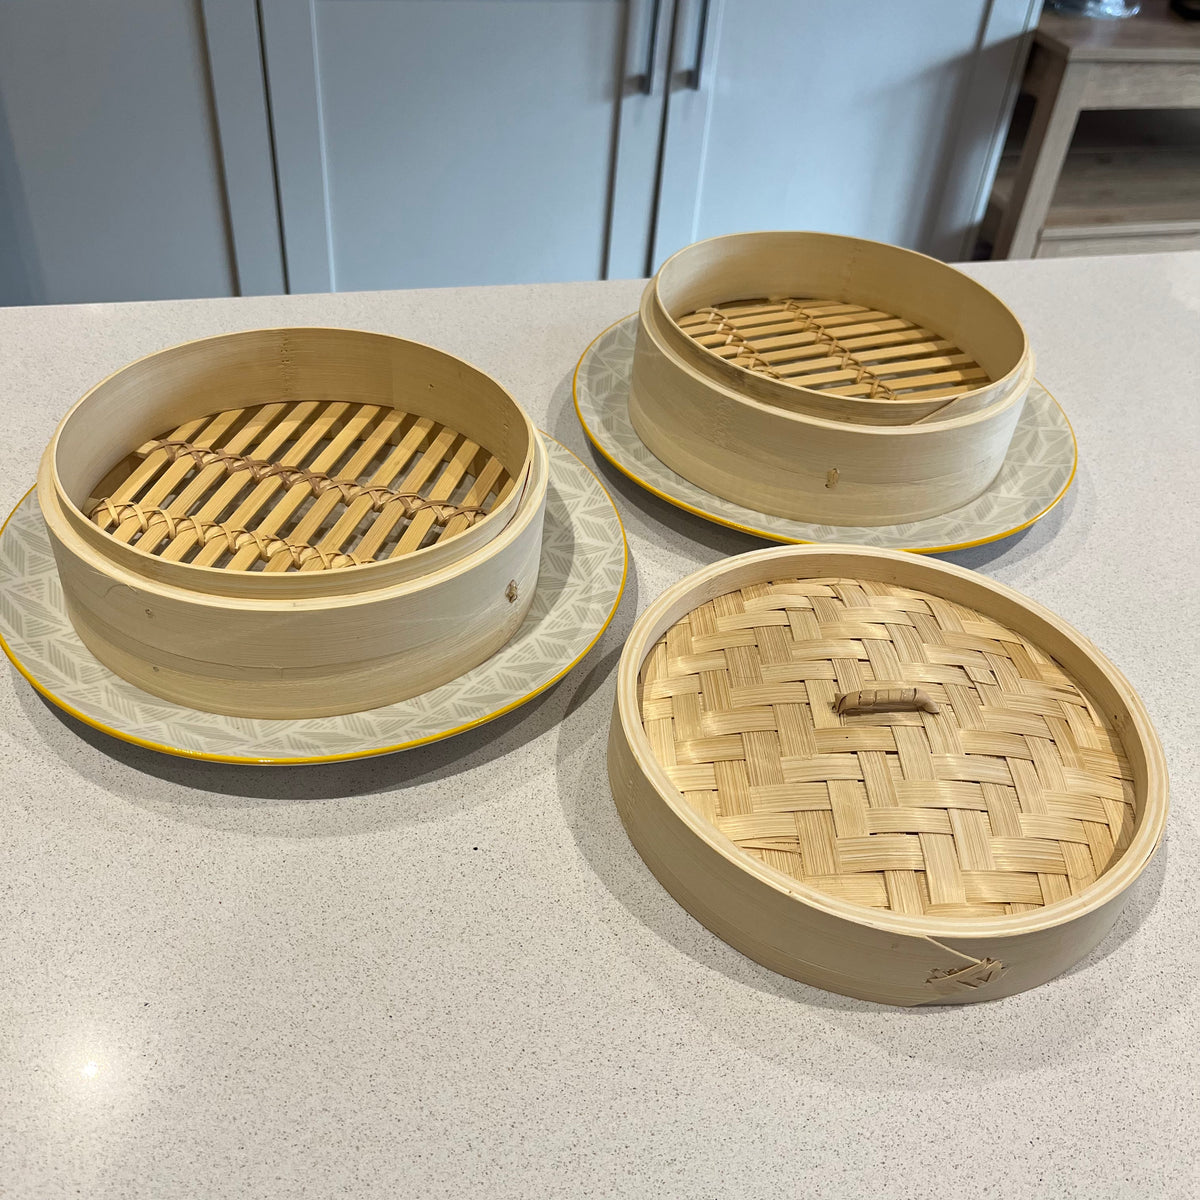 Two-Tier Bamboo Steamer on grey and yellow plates on grey kitchen bench